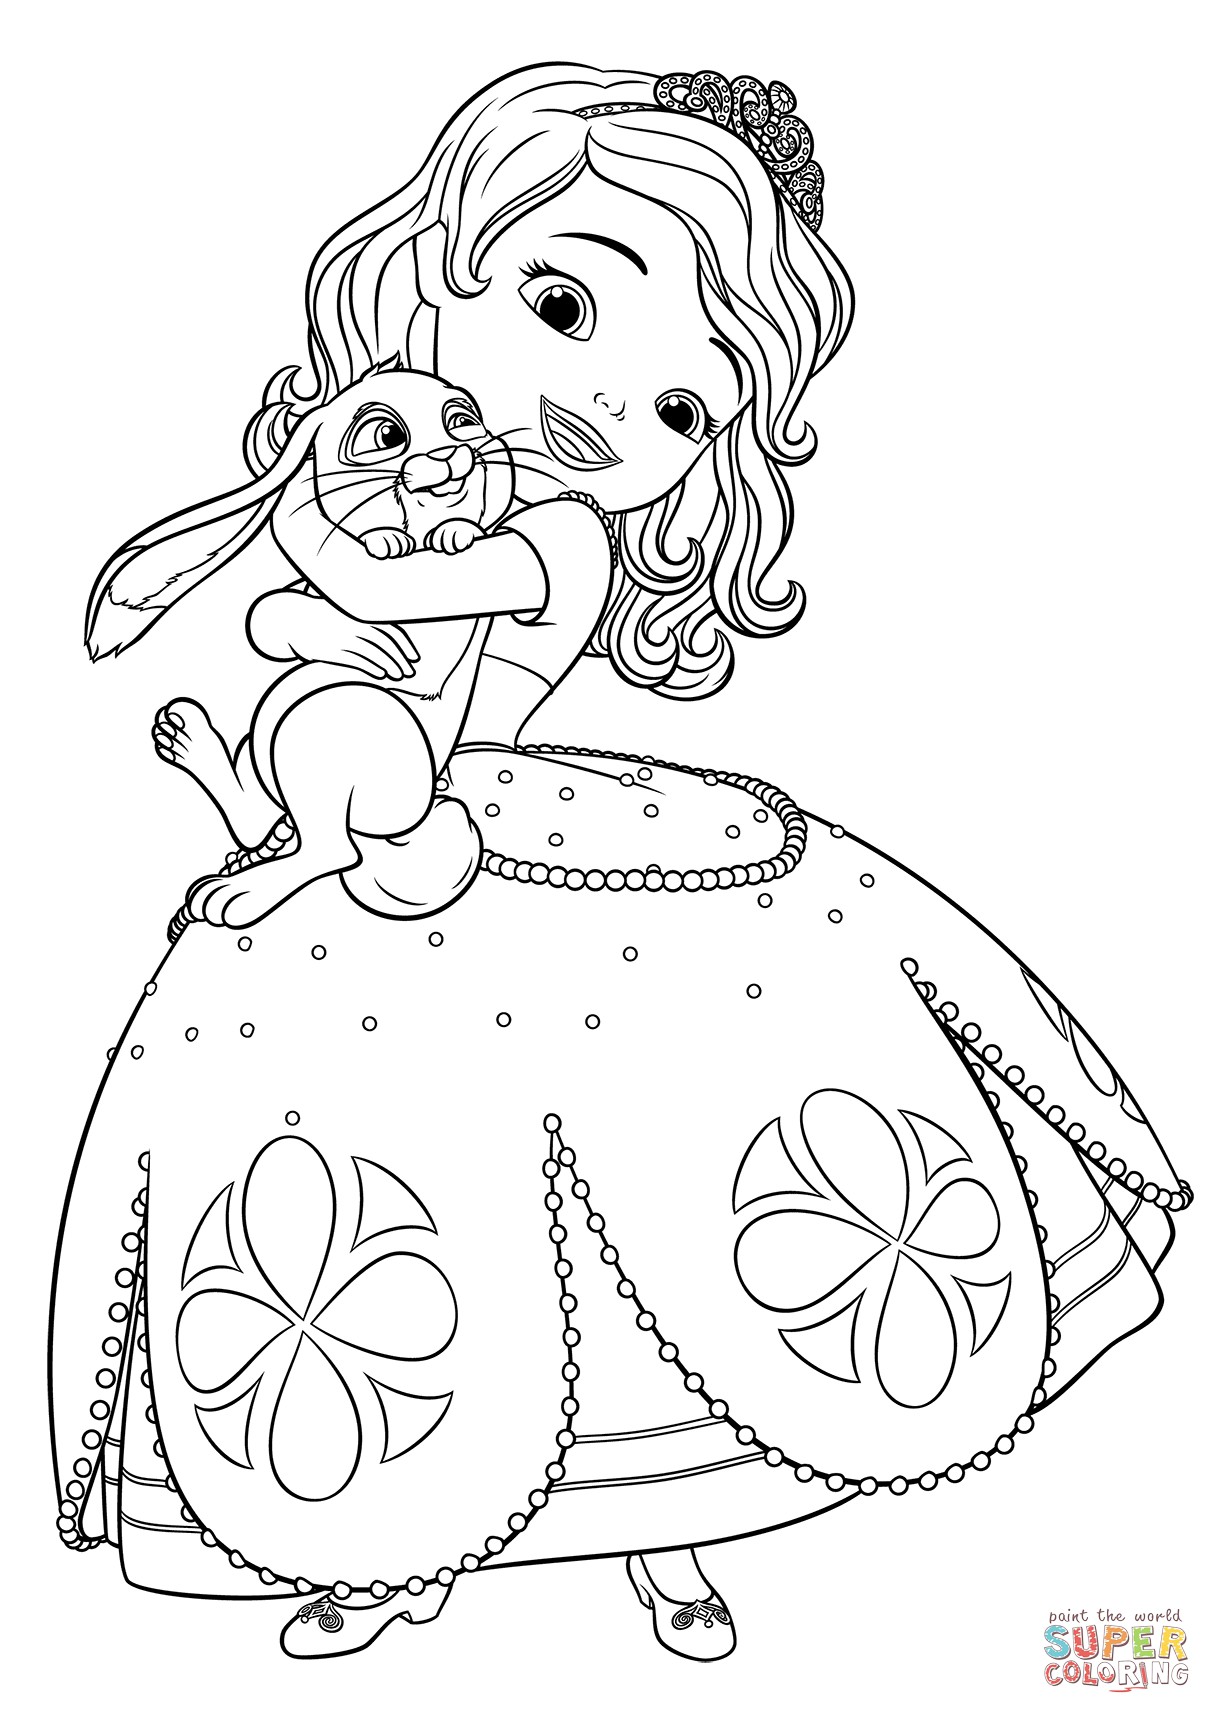 the Sofia and Clover coloring pages to view printable version or color it online patible with iPad and Android tablets